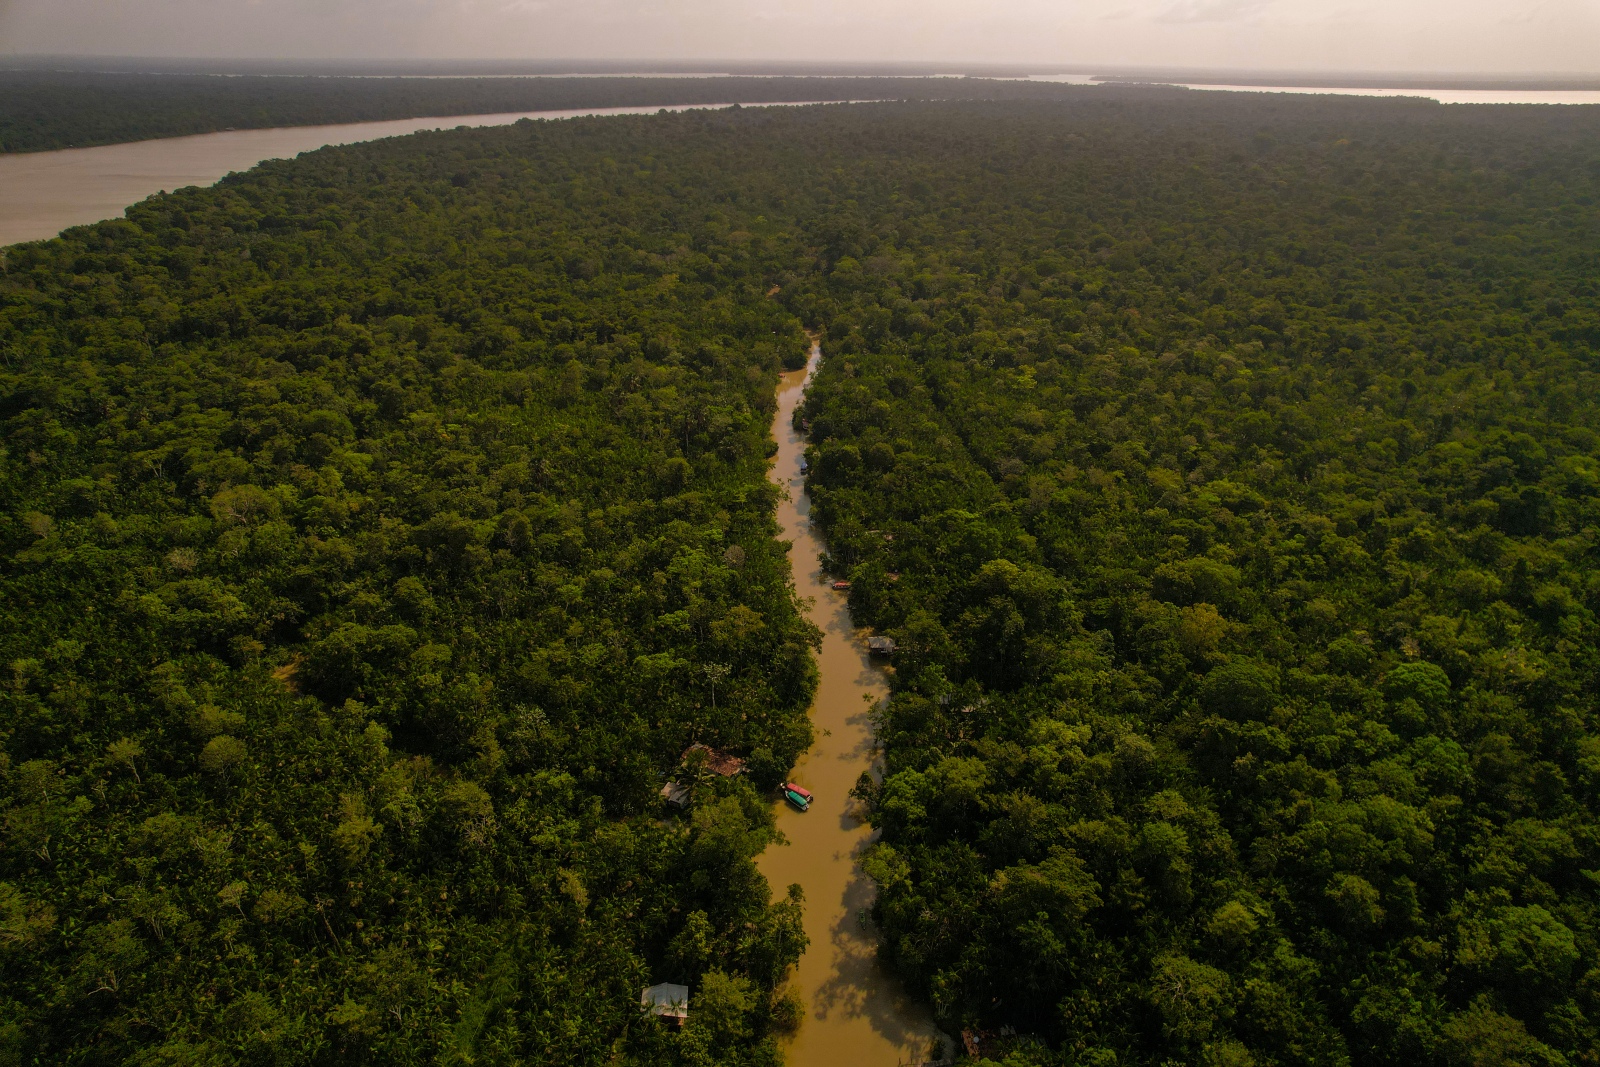 Aerial view of Guama River in the Amazon rainforest